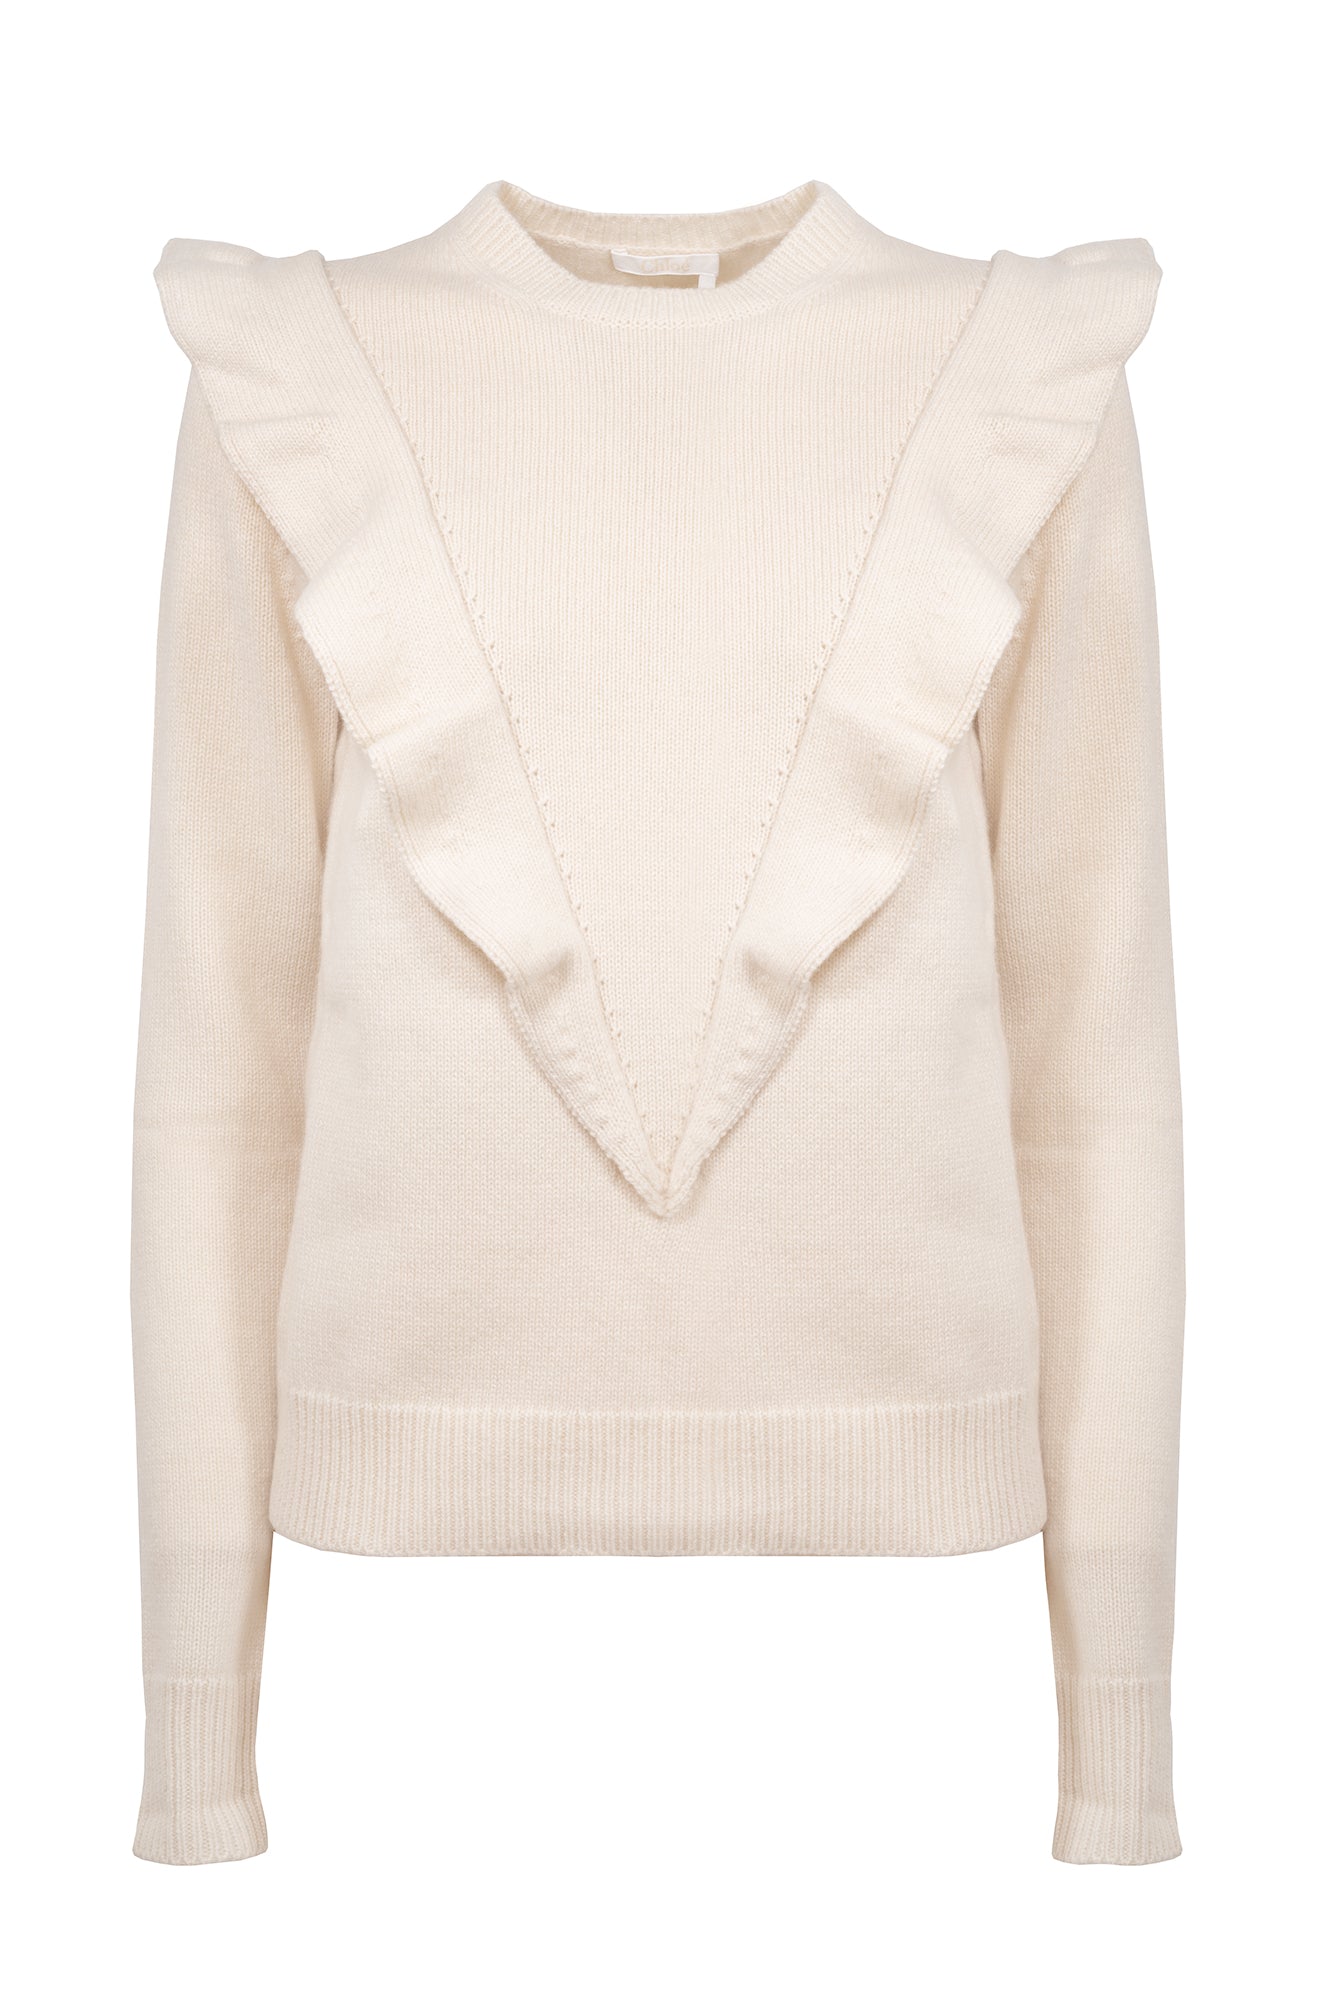 Crew-neck jumper with white ruffles